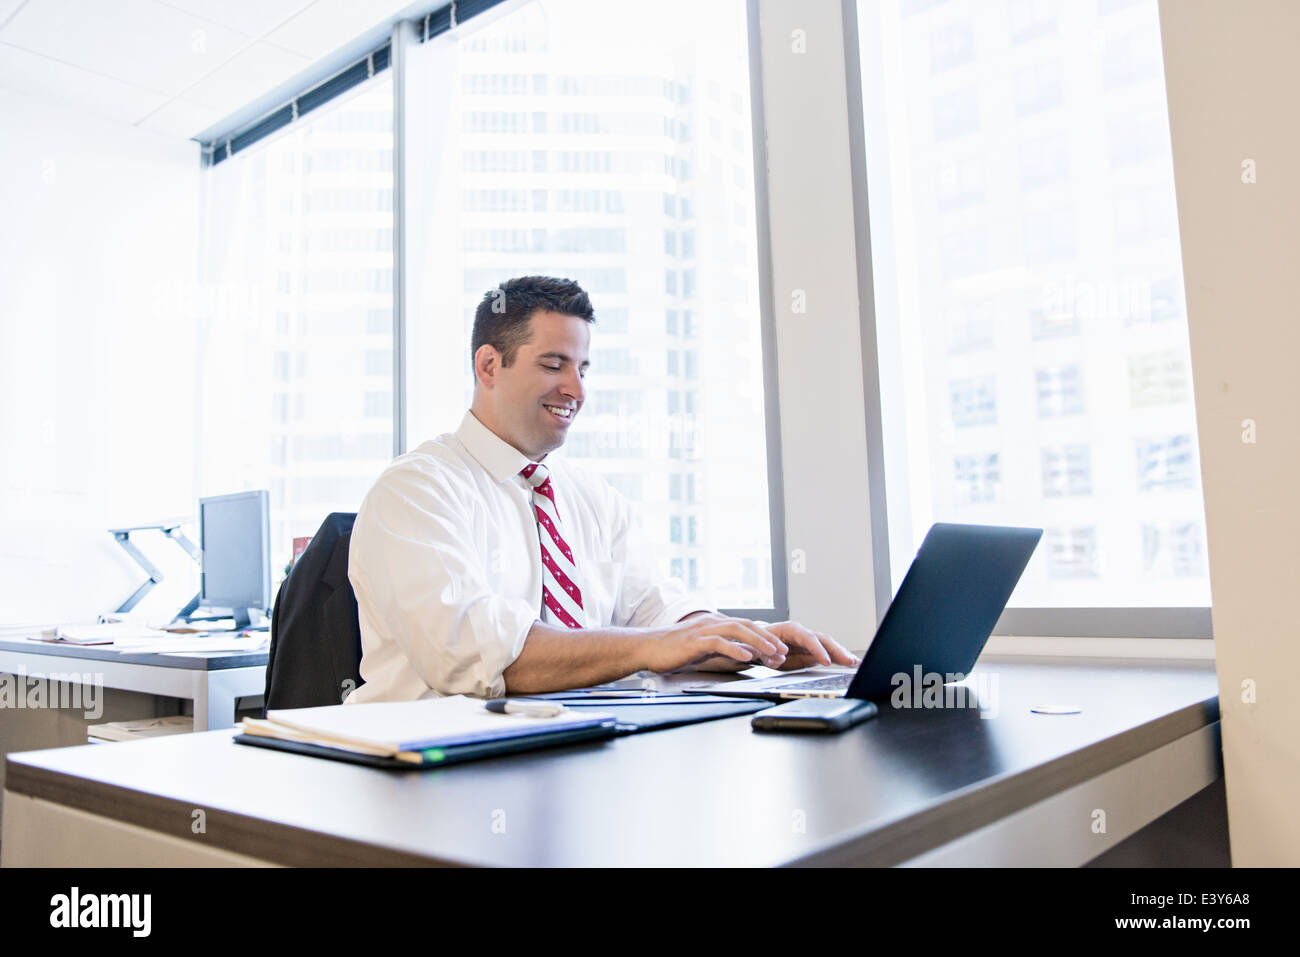 Business lawyer using laptop in office Stock Photo